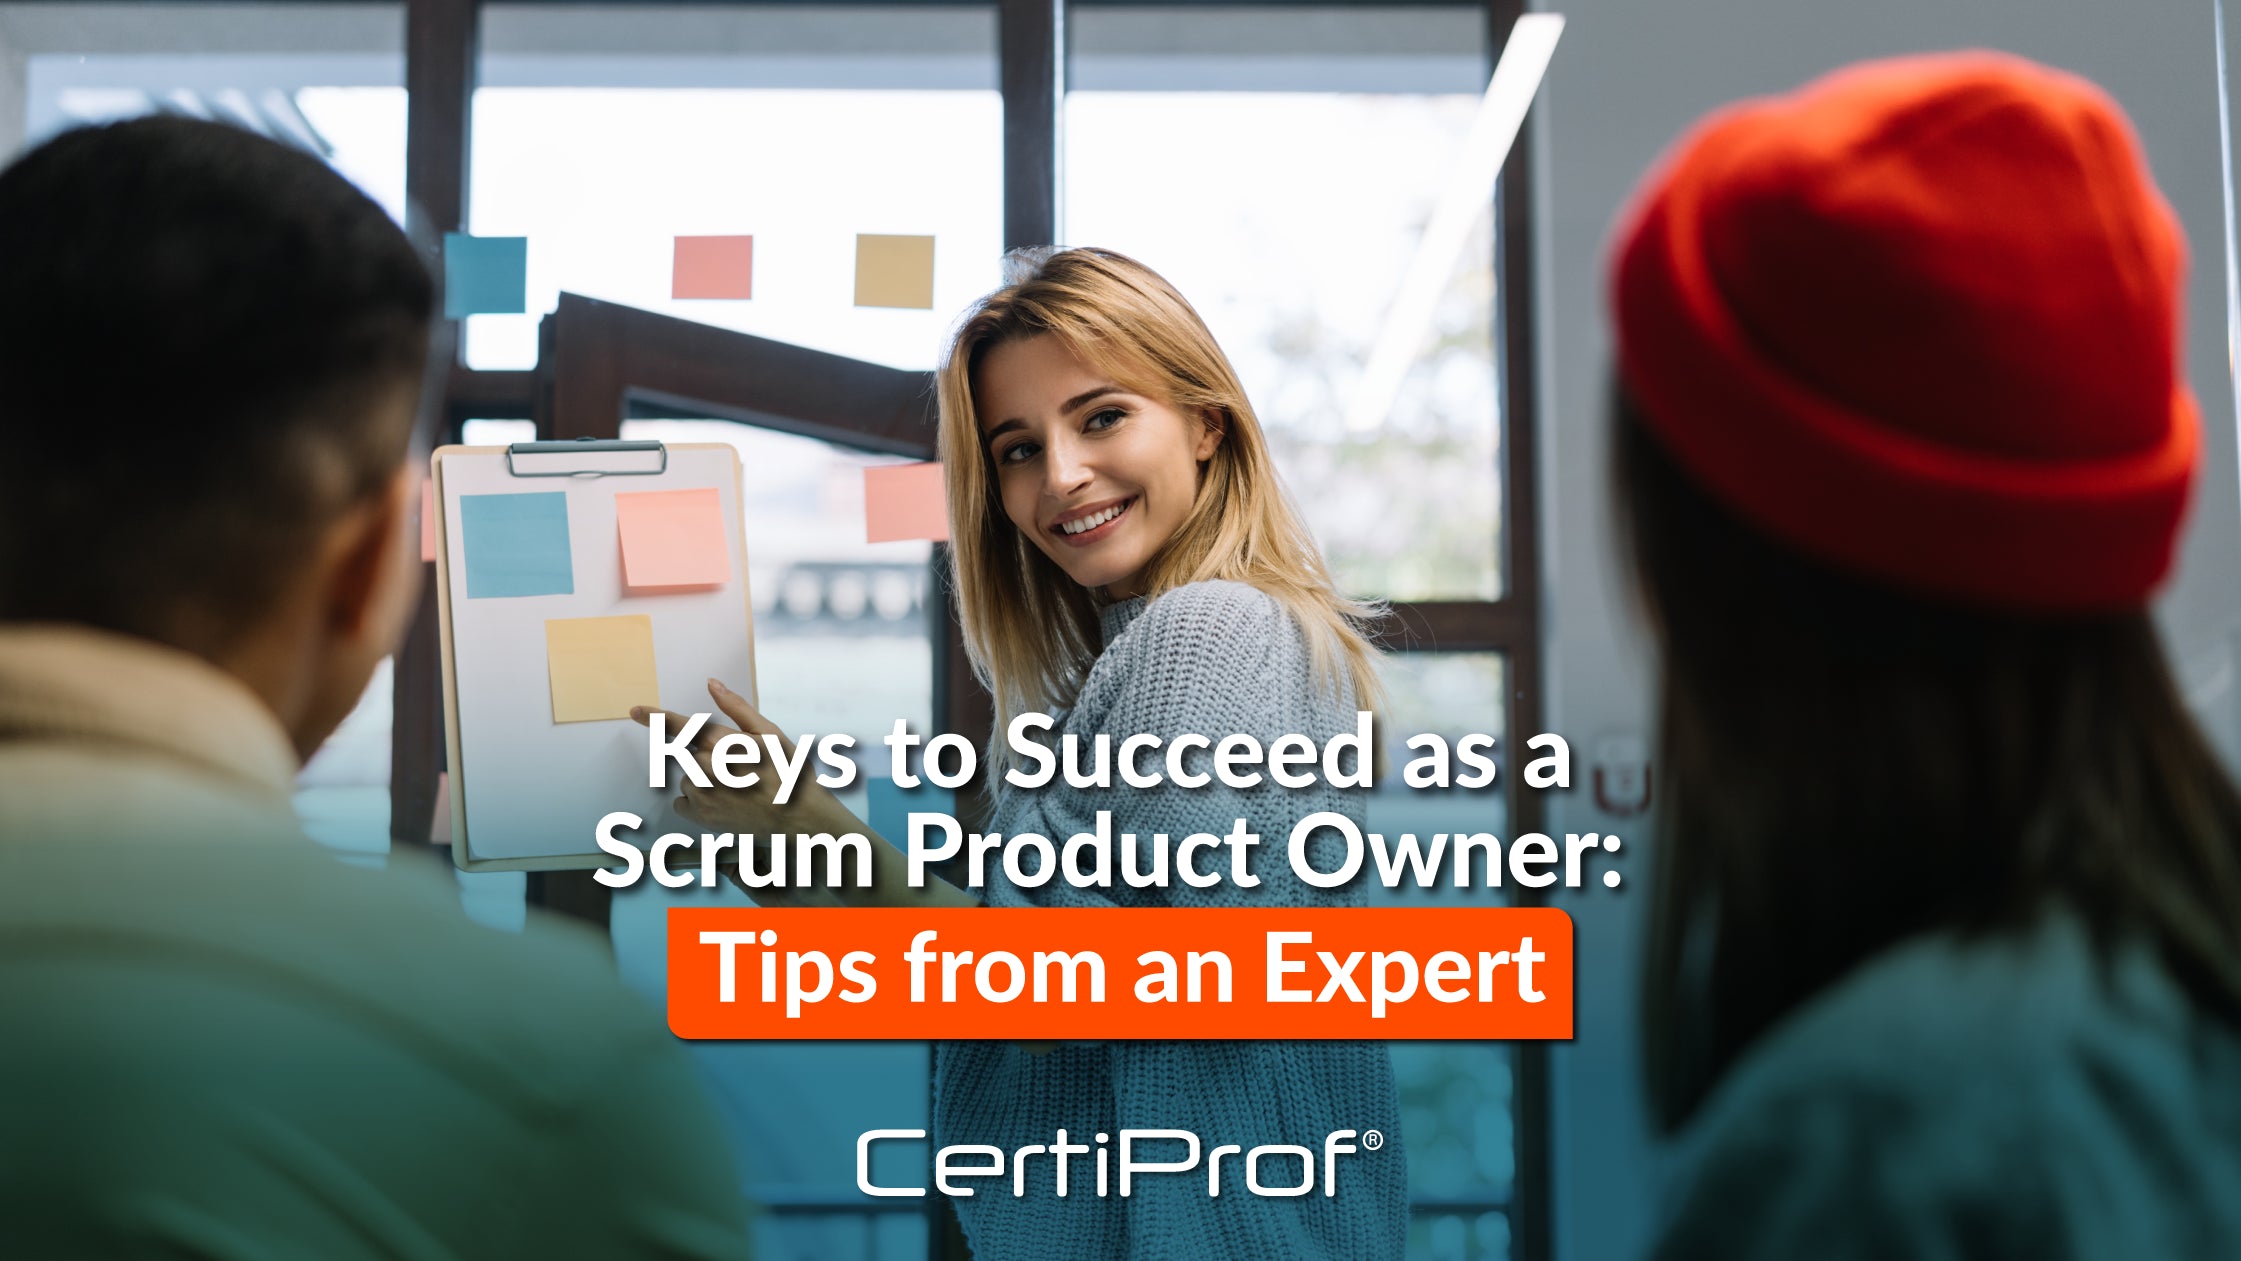 Keys to Succeed as a Scrum Product Owner: Tips from an Expert